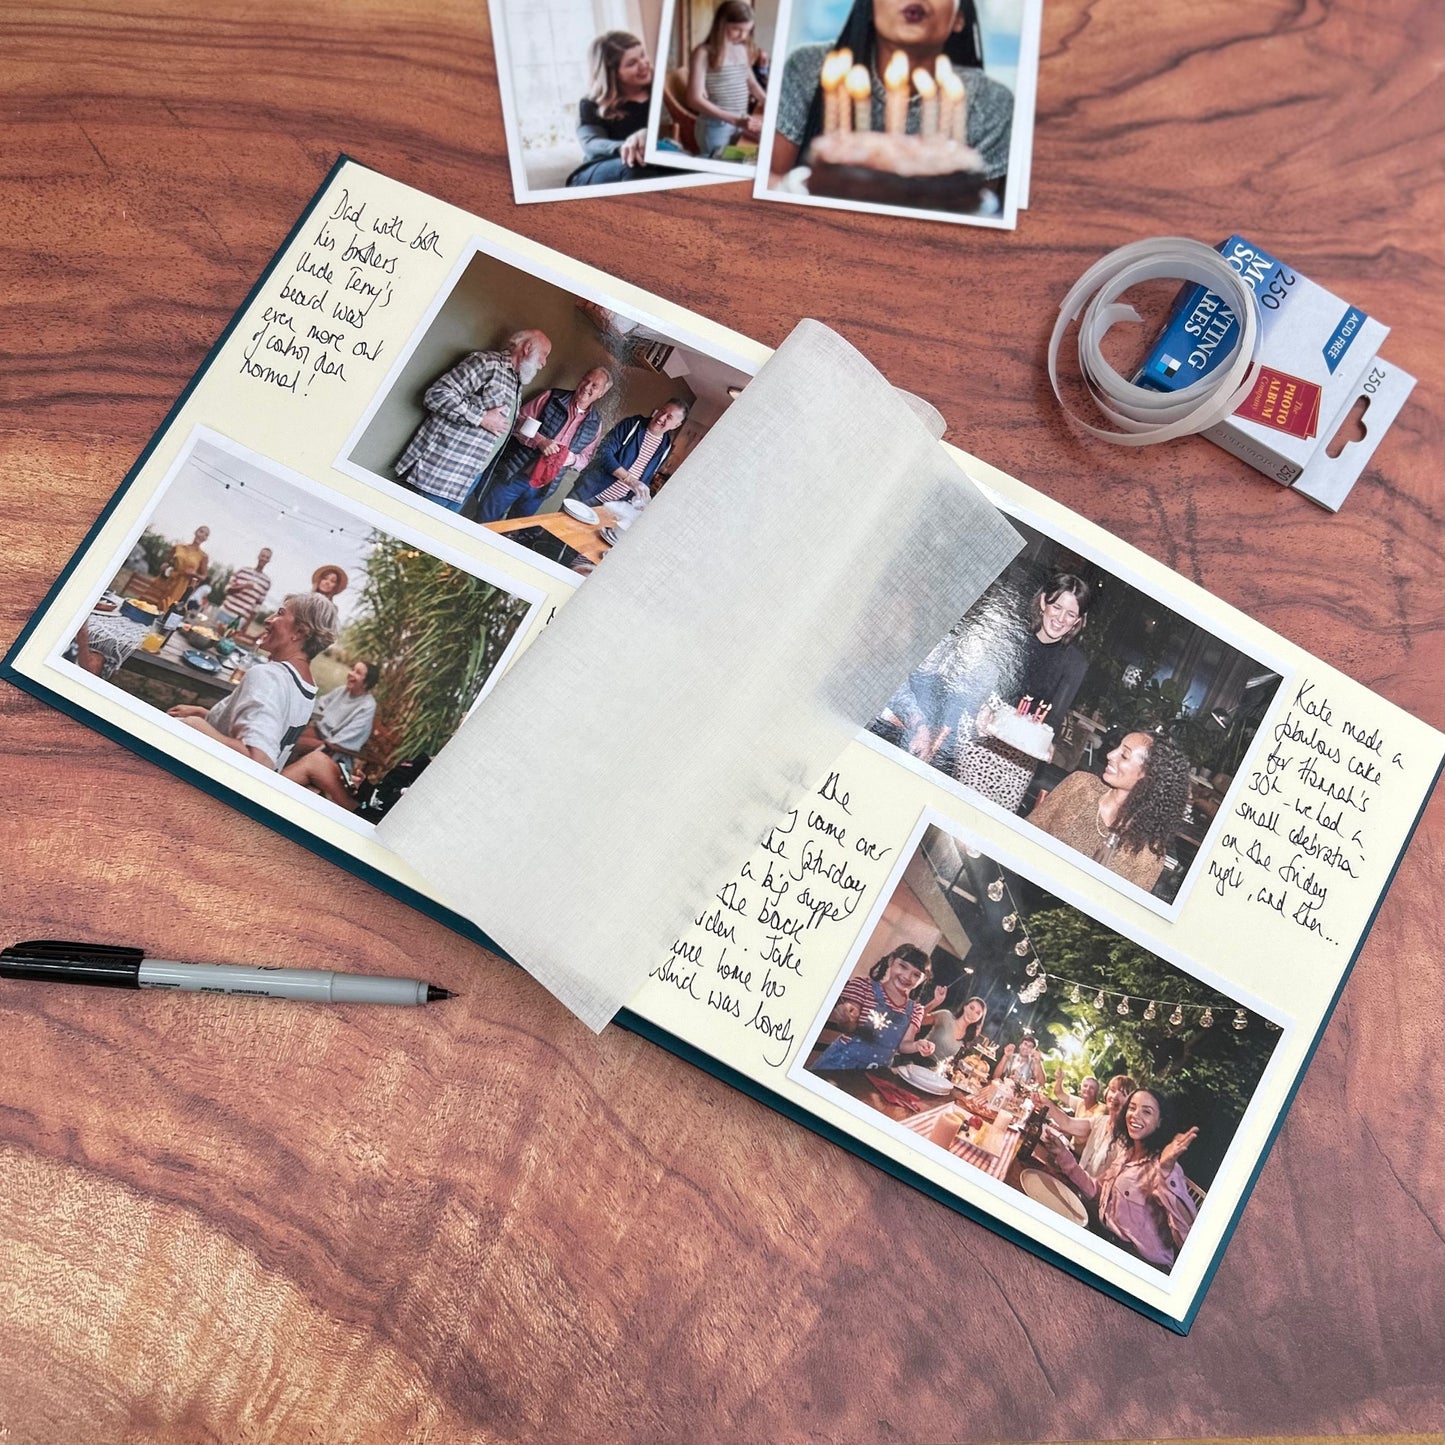 a photo album lies open on a coffee table and you can see all the photos inside. Next to the photos are handwritten messages. Also on the table is a pile of spare photos and a box of mounting squares